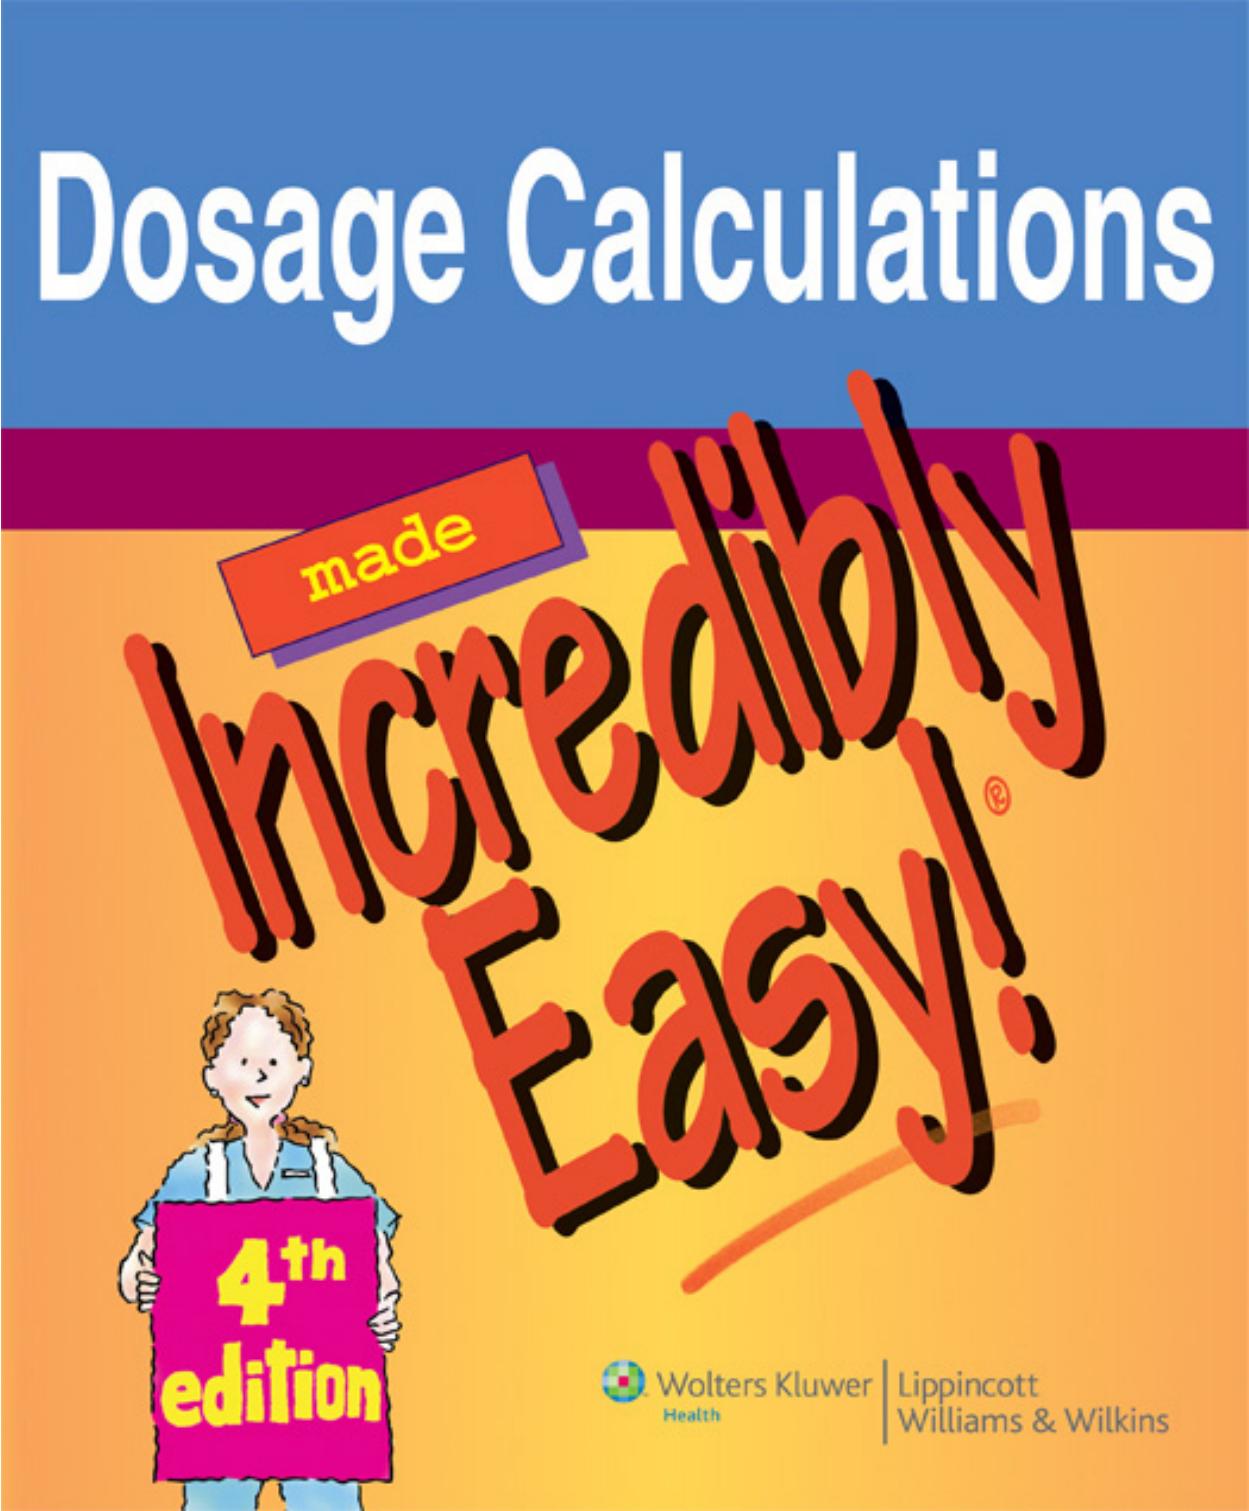 Dosage Calculations Made Incredibly Easy 4th Edition - Springhouse.jpg